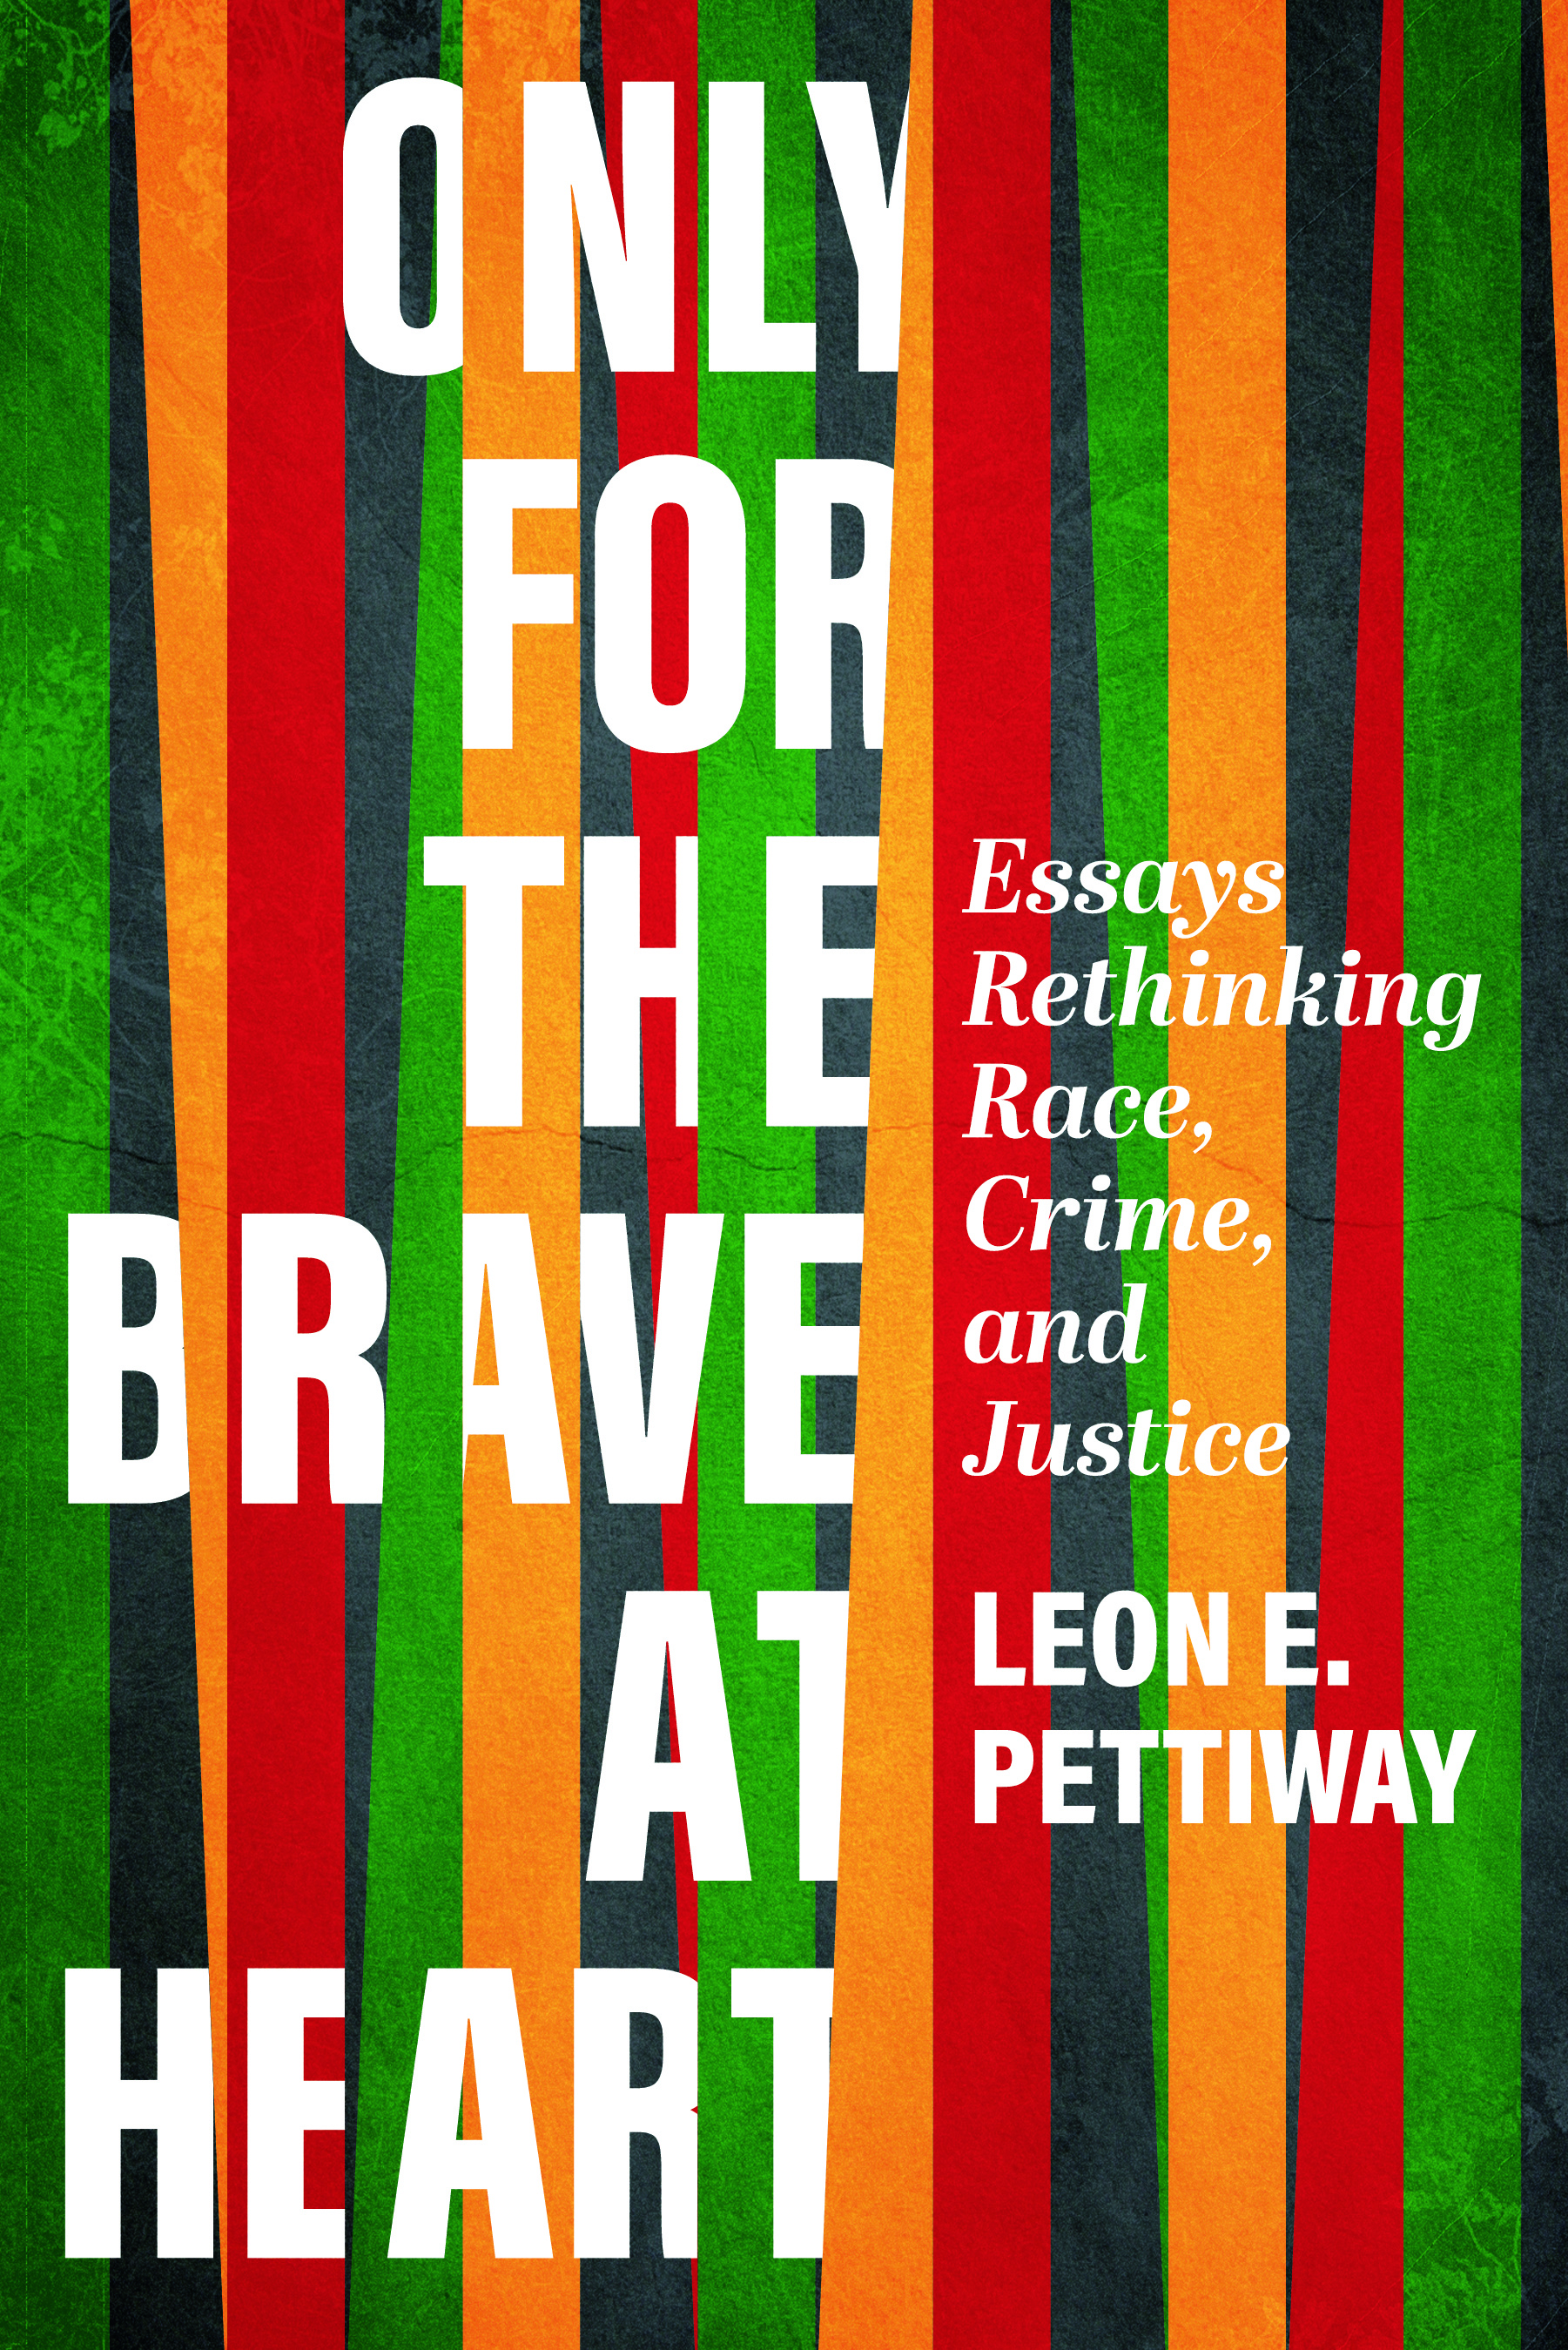 Book Cover: Only for the Brave at Heart: Essays Rethinking Race, Crime, and Justice by Leon E. Pettiway